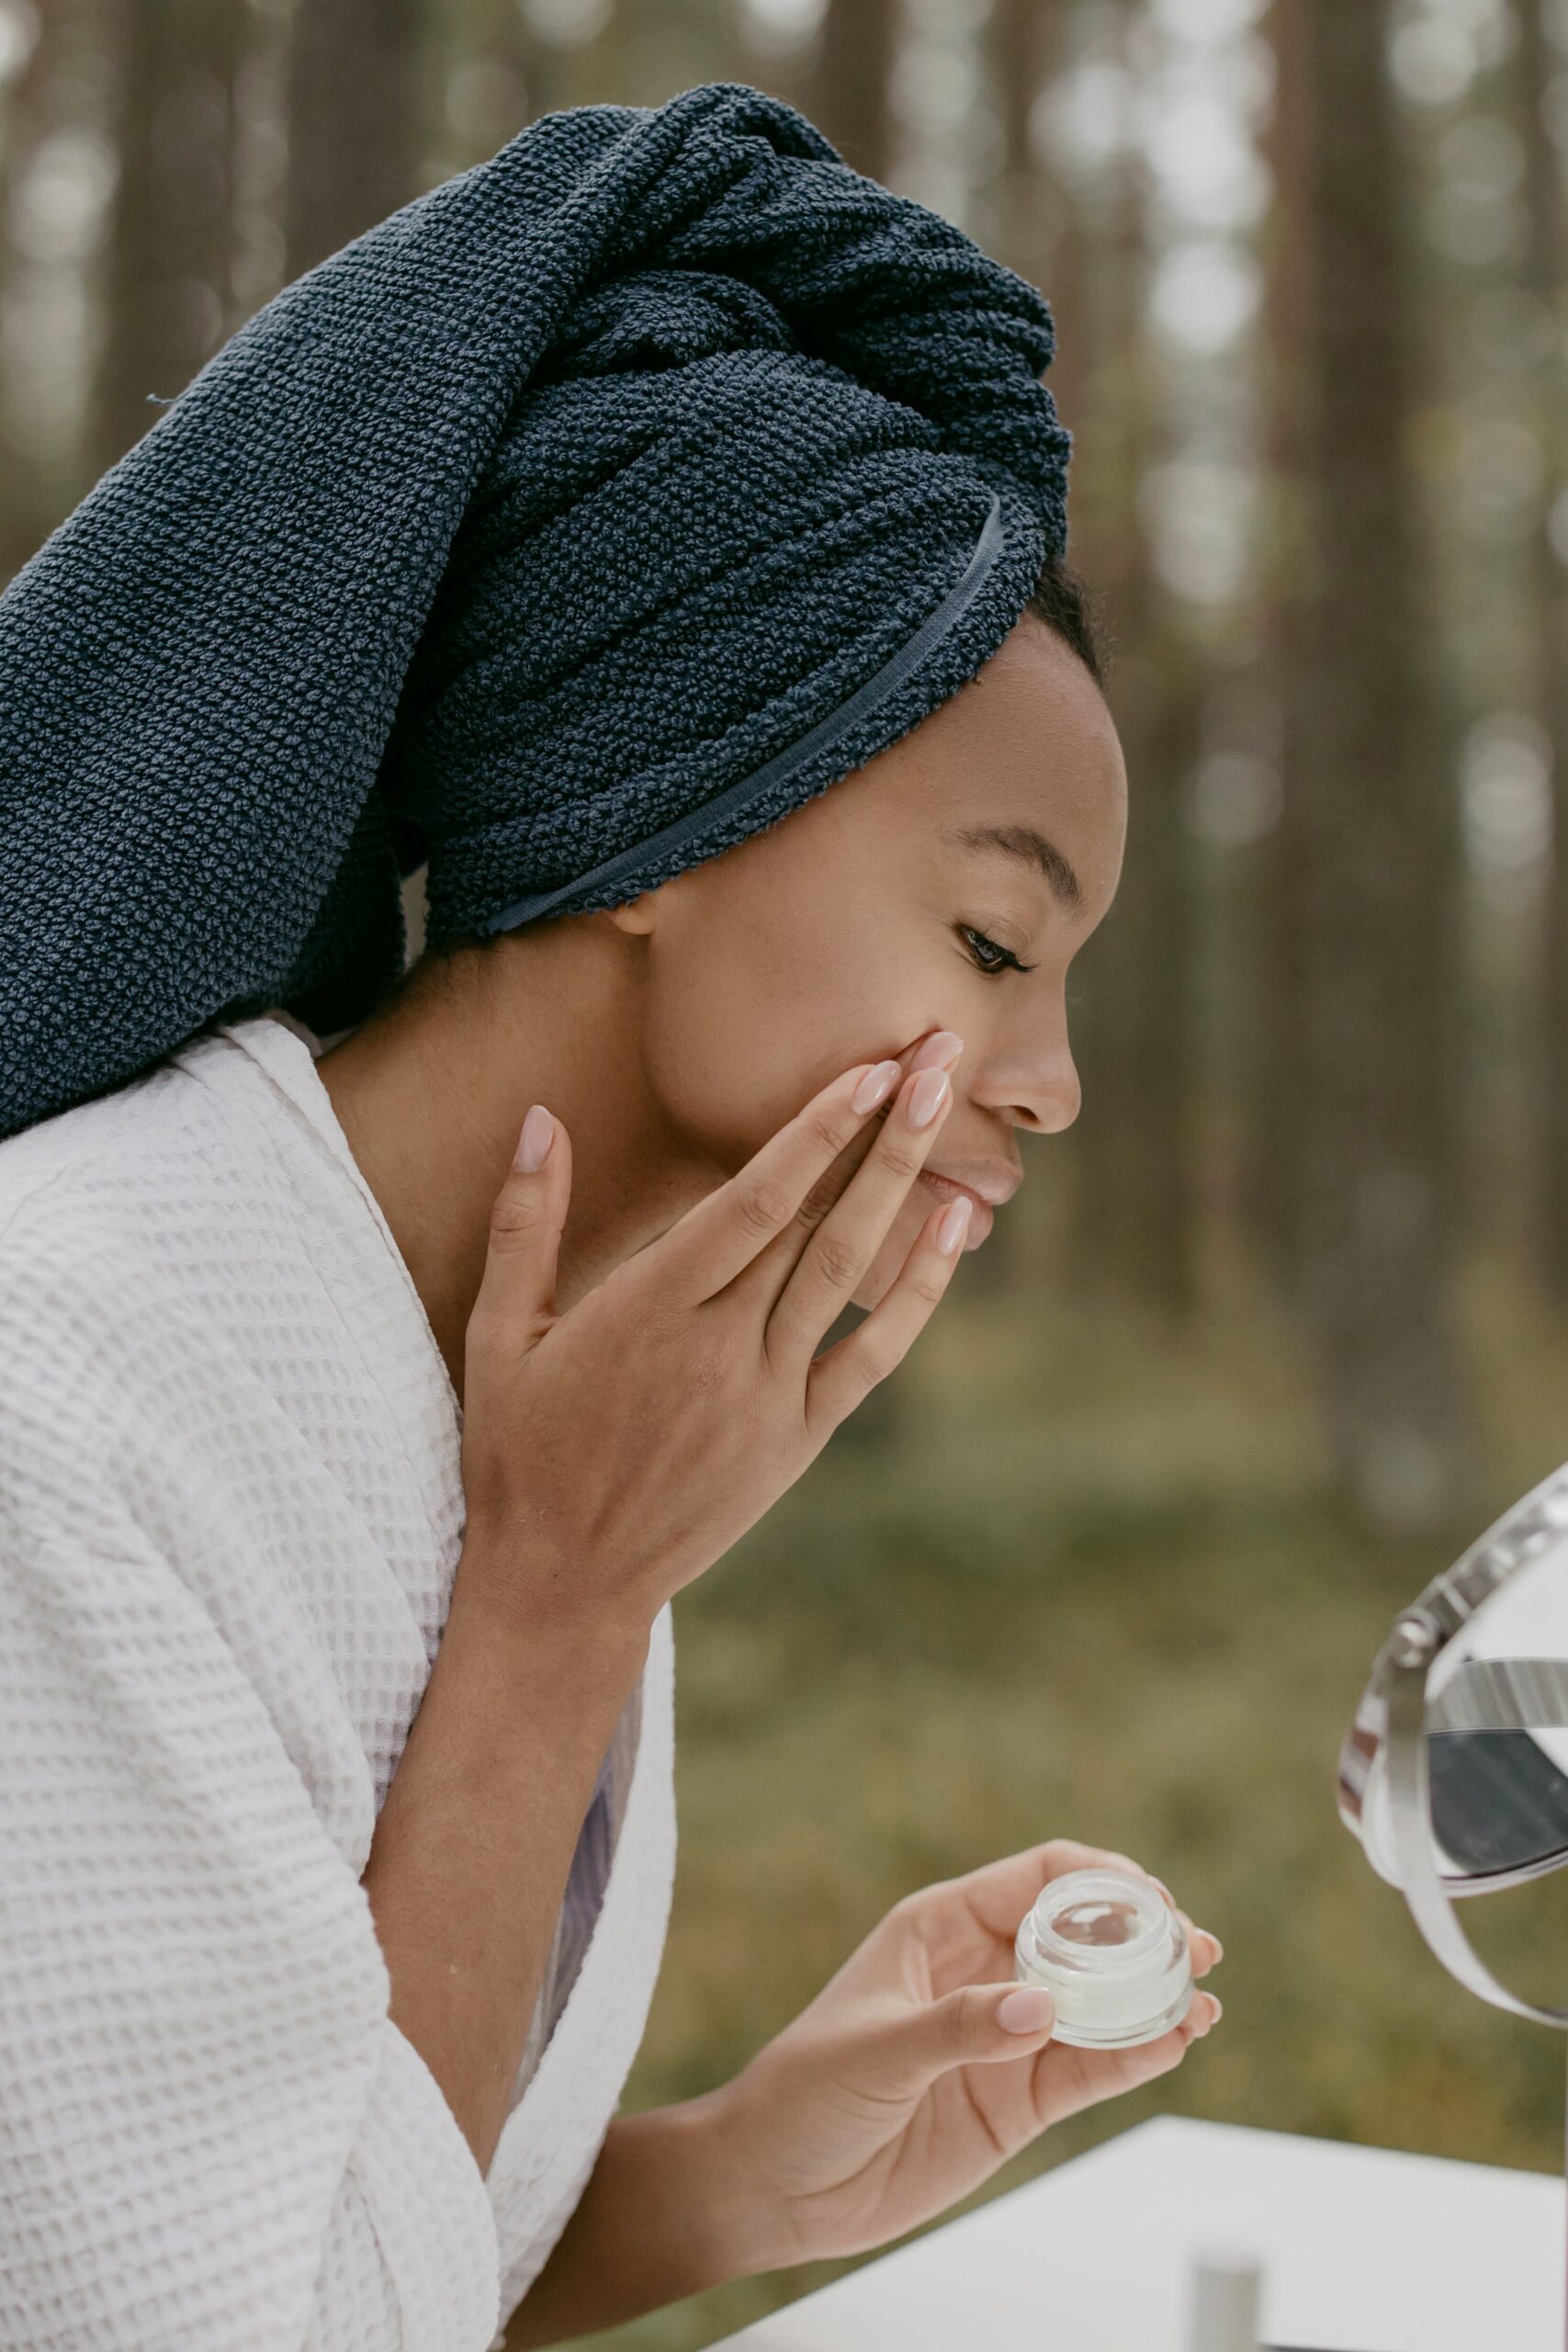 How Skin Care Products Help Boost Your Confidence